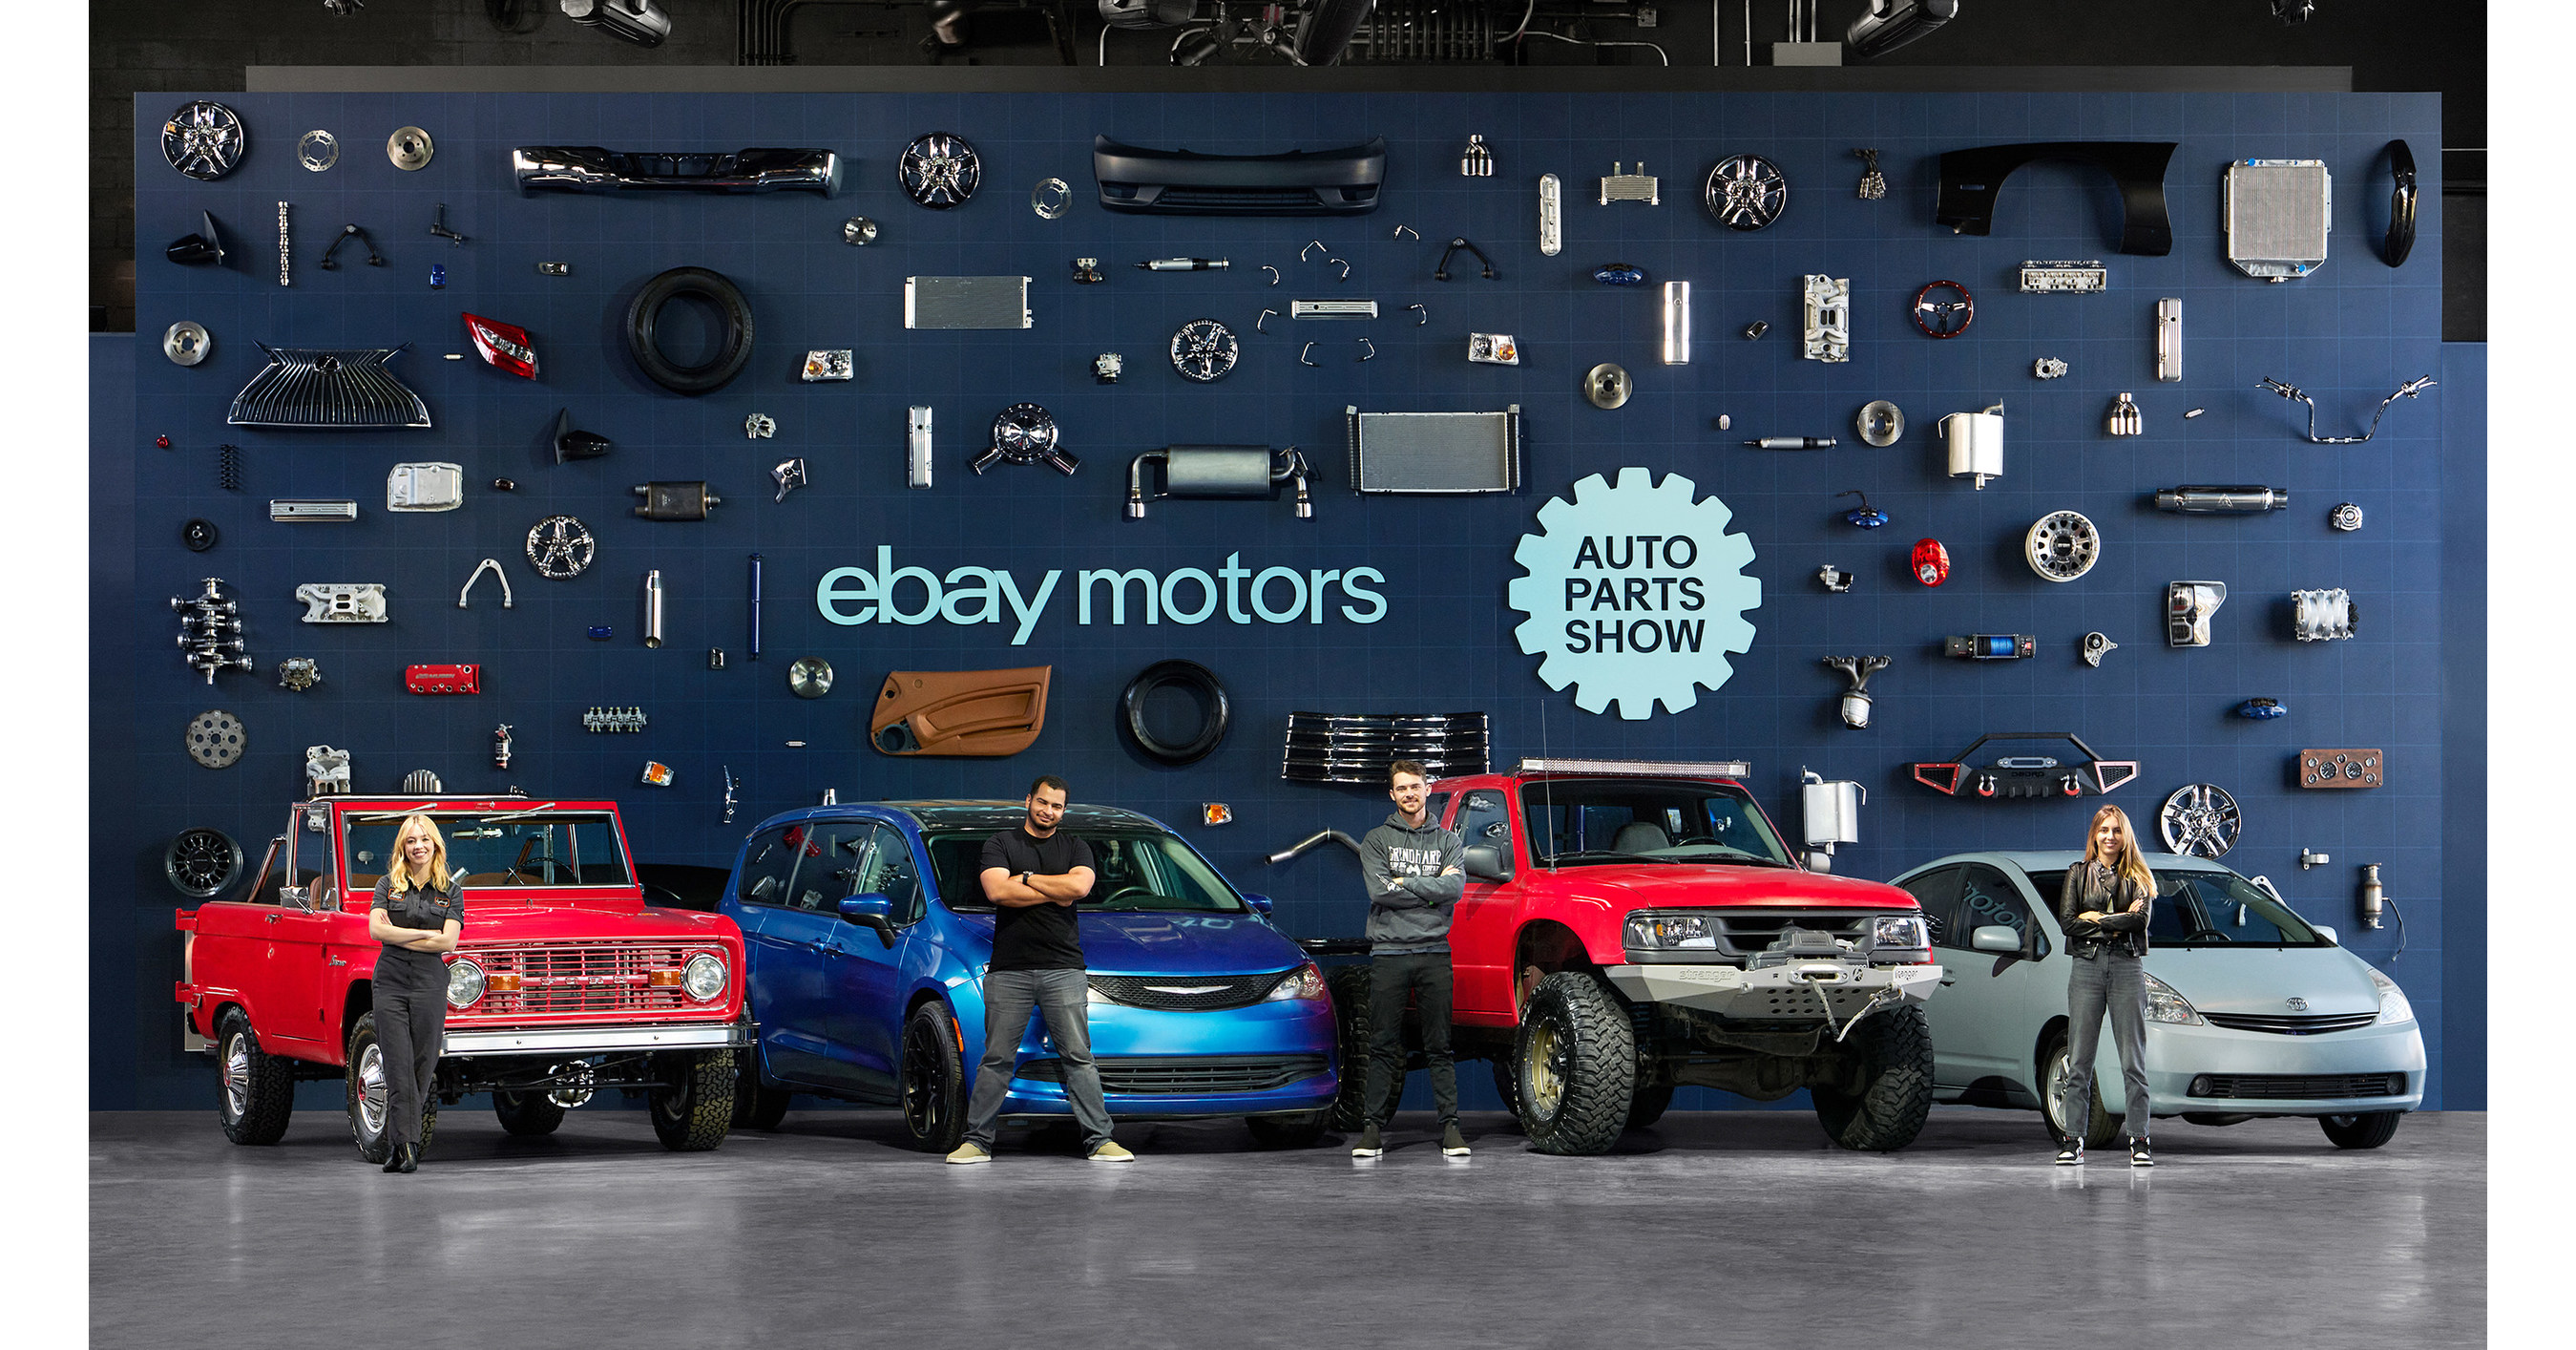 eBay Motors Kicks Off Its Inaugural “New York Auto Parts Show” To Meet The Demands Of A Strained Market